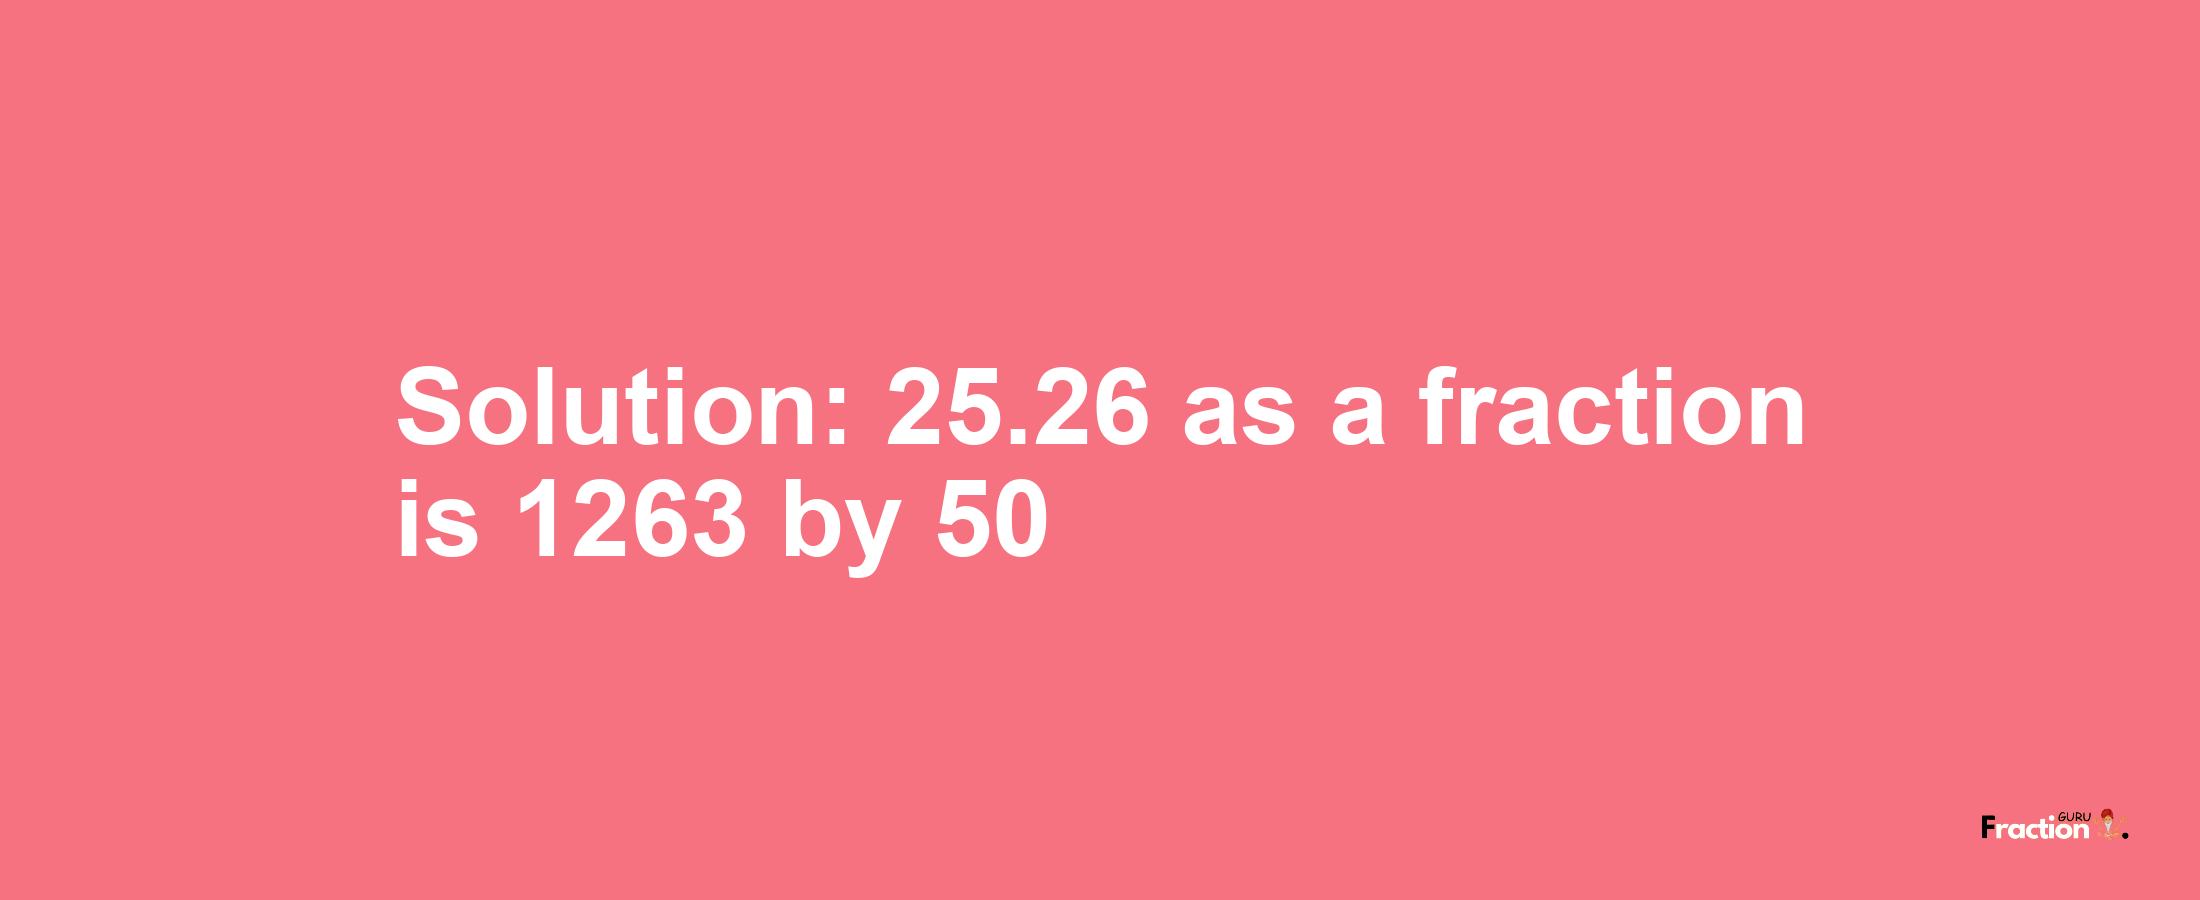 Solution:25.26 as a fraction is 1263/50